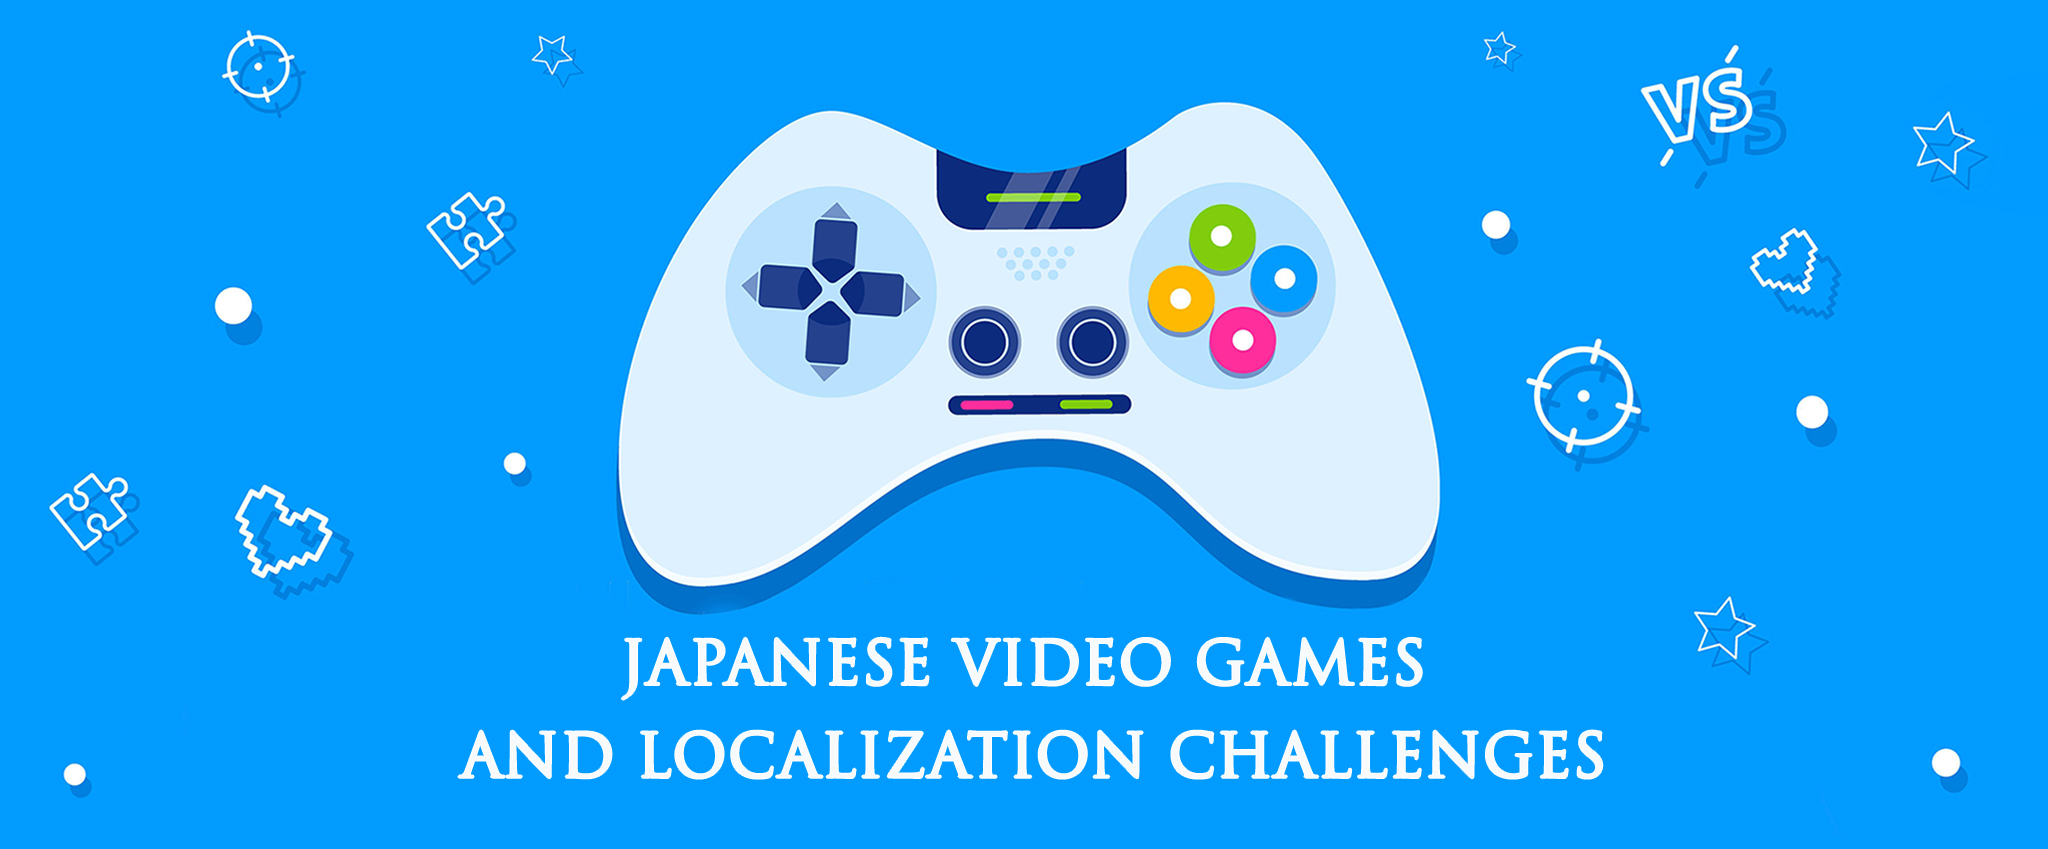 Japanese Video Games and Localization Challenges